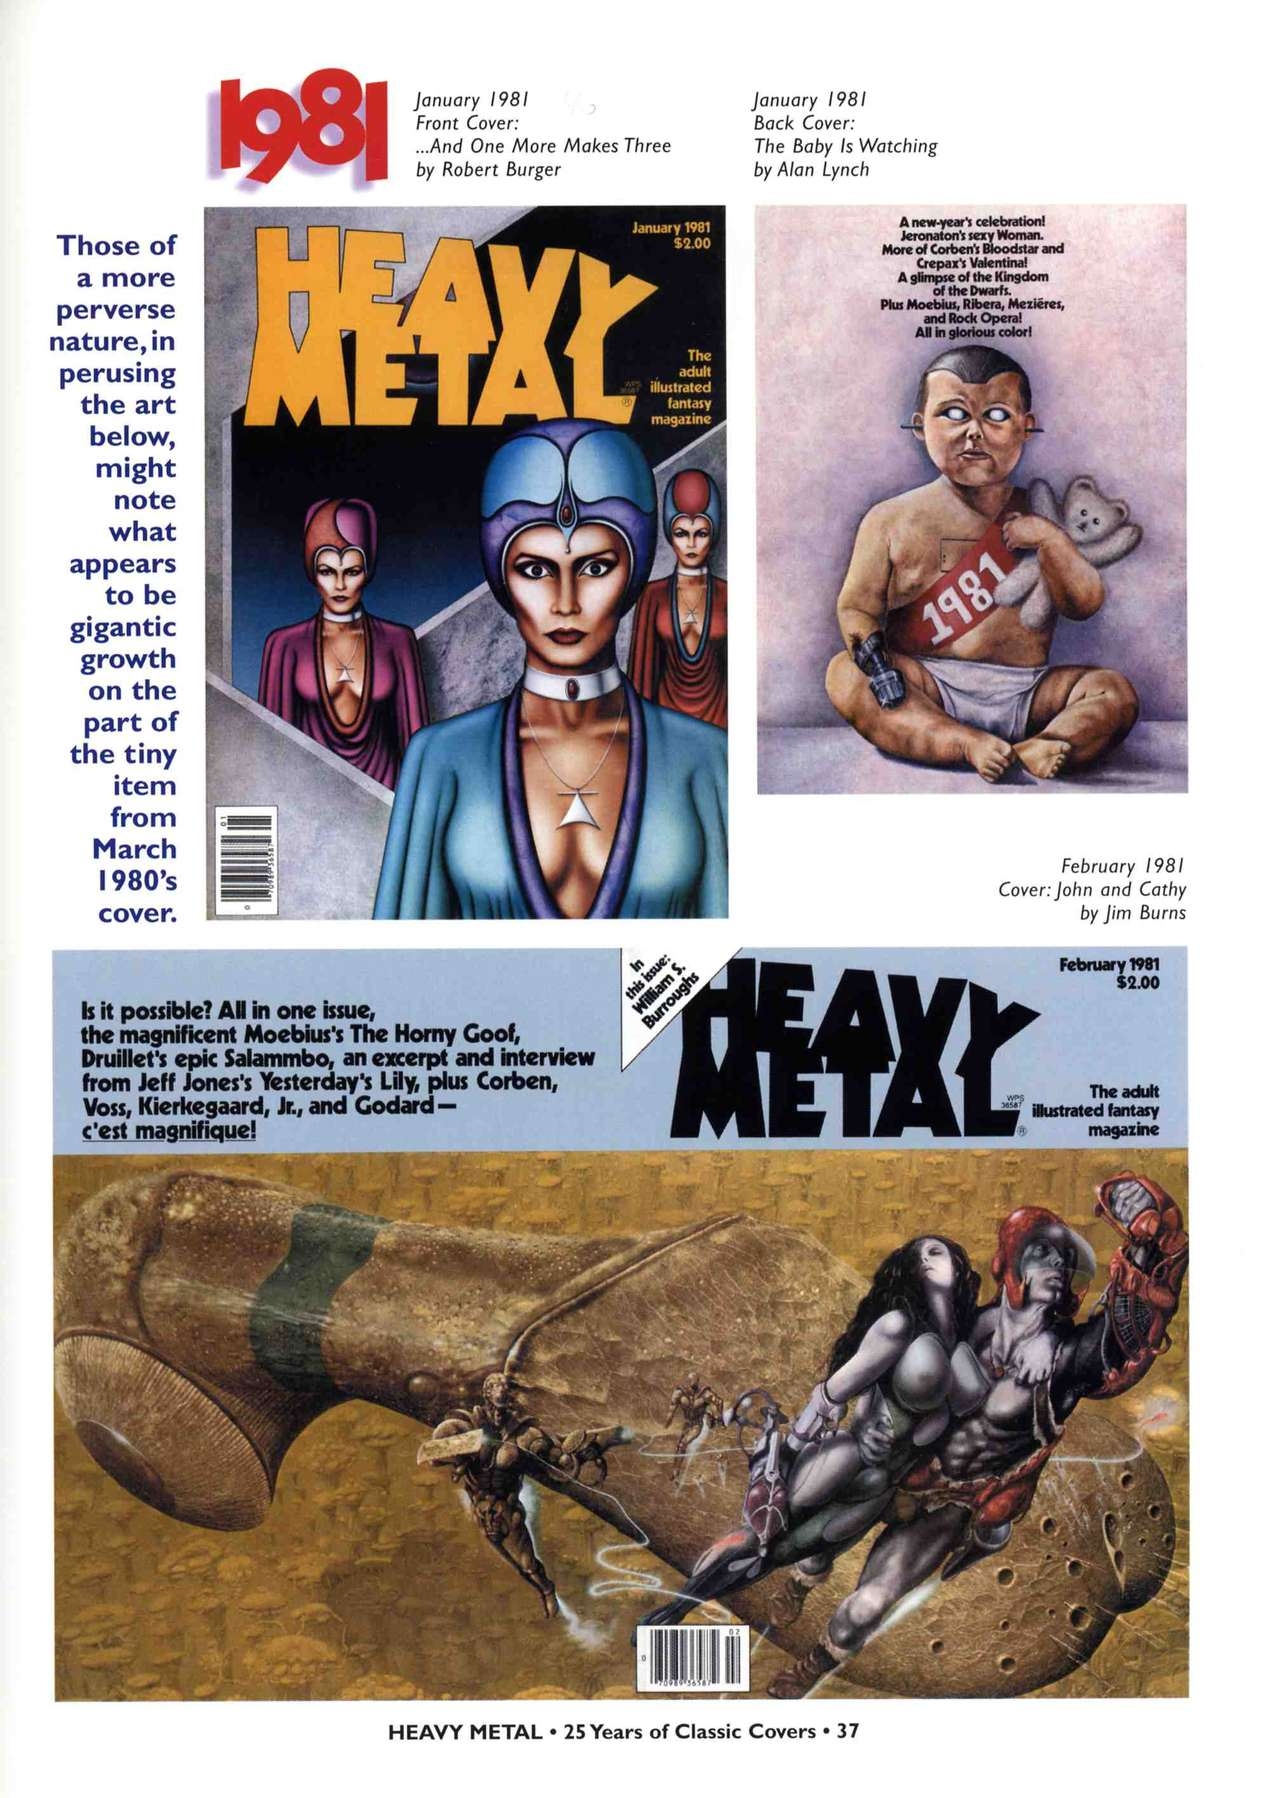 HEAVY METAL 25 Years of Classic Covers 42